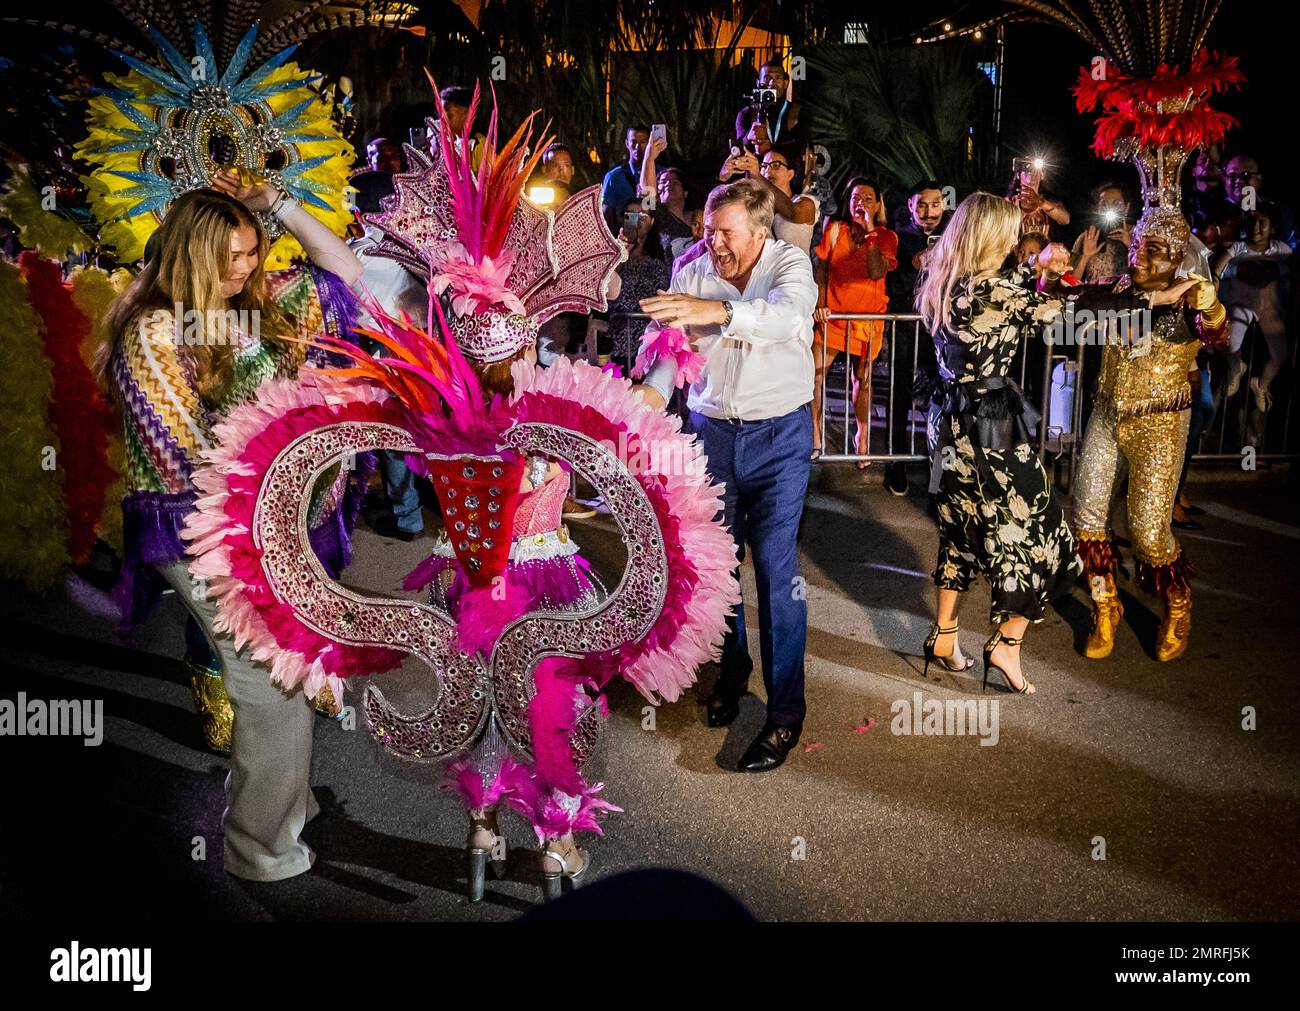 Collega bezoek Centraliseren ARUBA - Princess Amalia, King Willem-Alexander and Queen Maxima dance  during a visit to Bon Bini Festival on the second day of the royal couple  and Princess Amalia's visit to Aruba. The